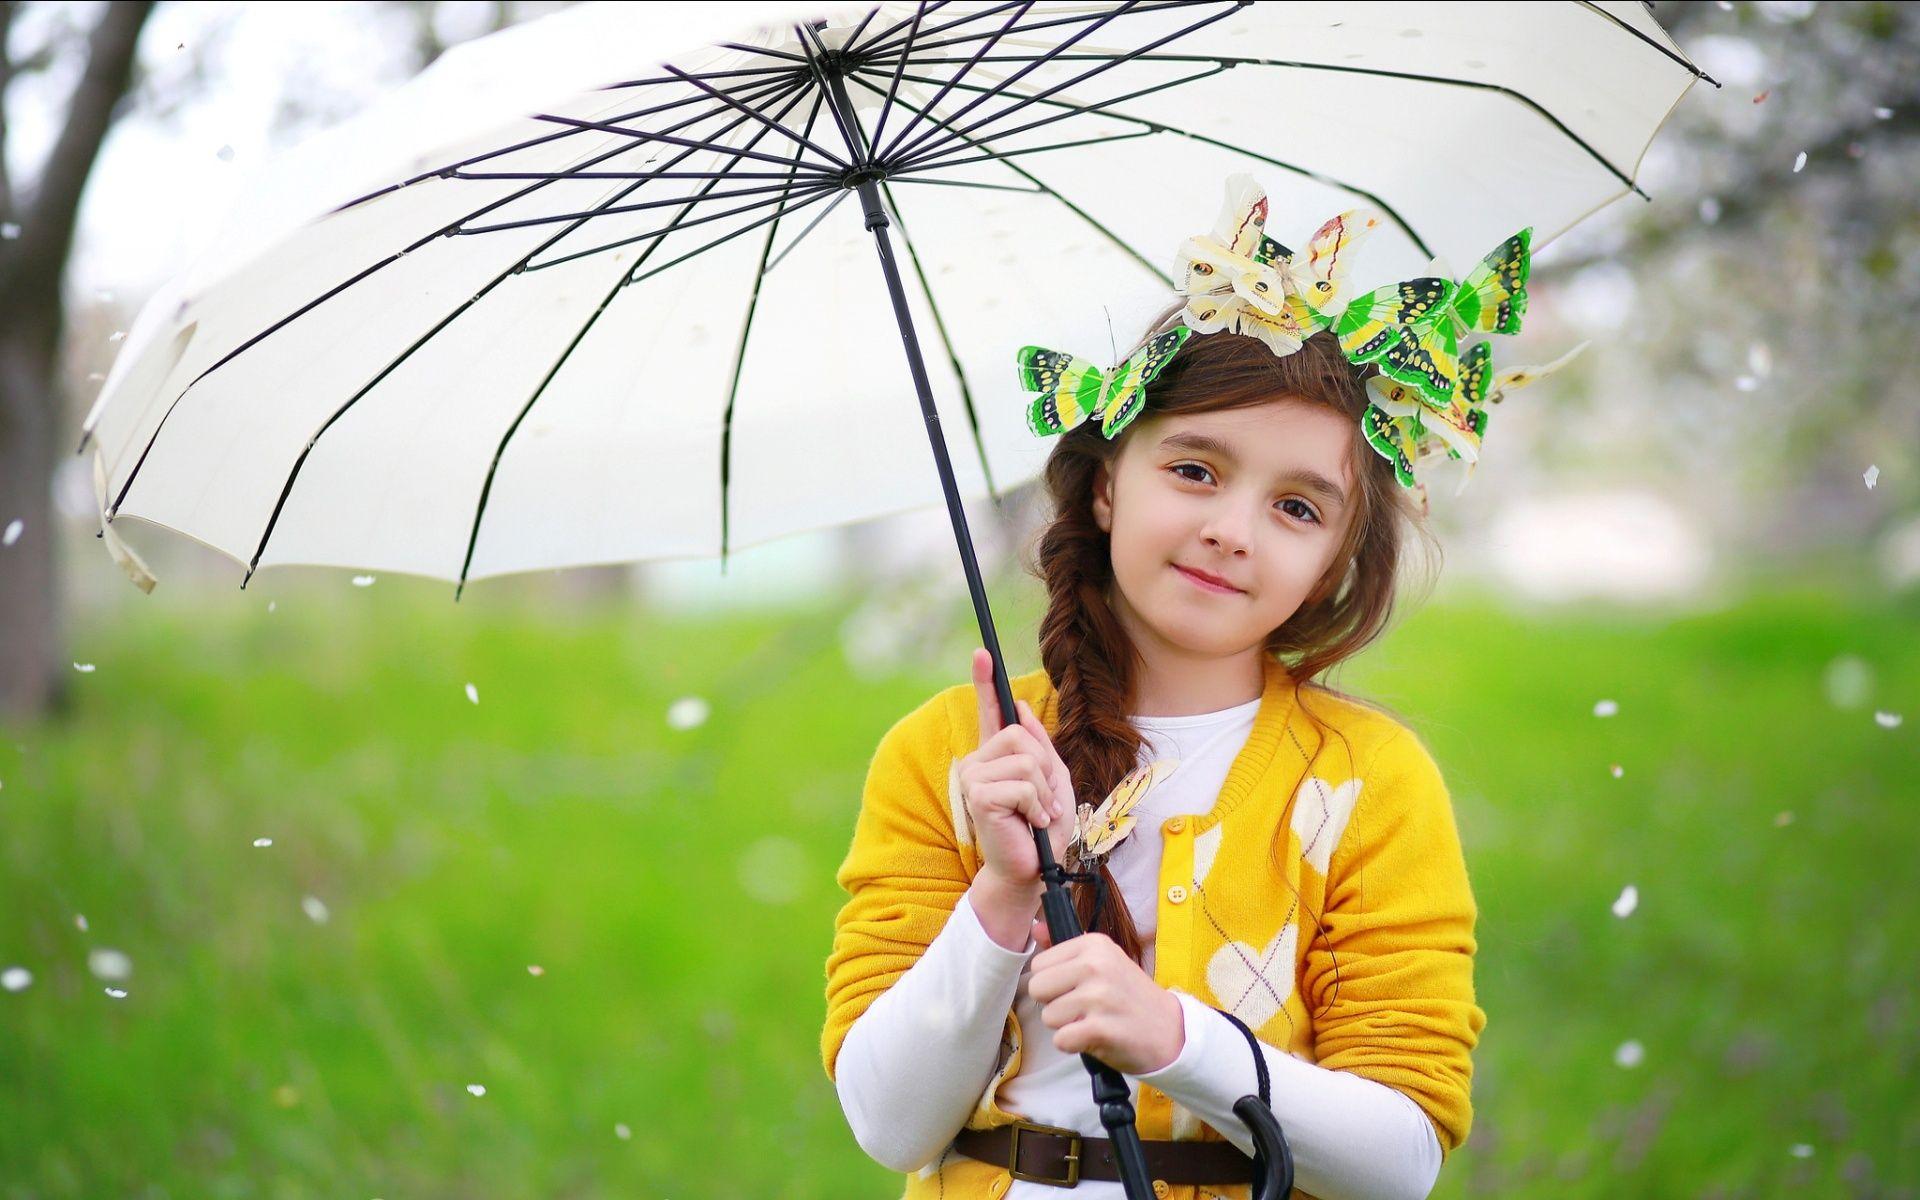 Find out: Cute Baby Girl with White Umbrella wallpapers on http